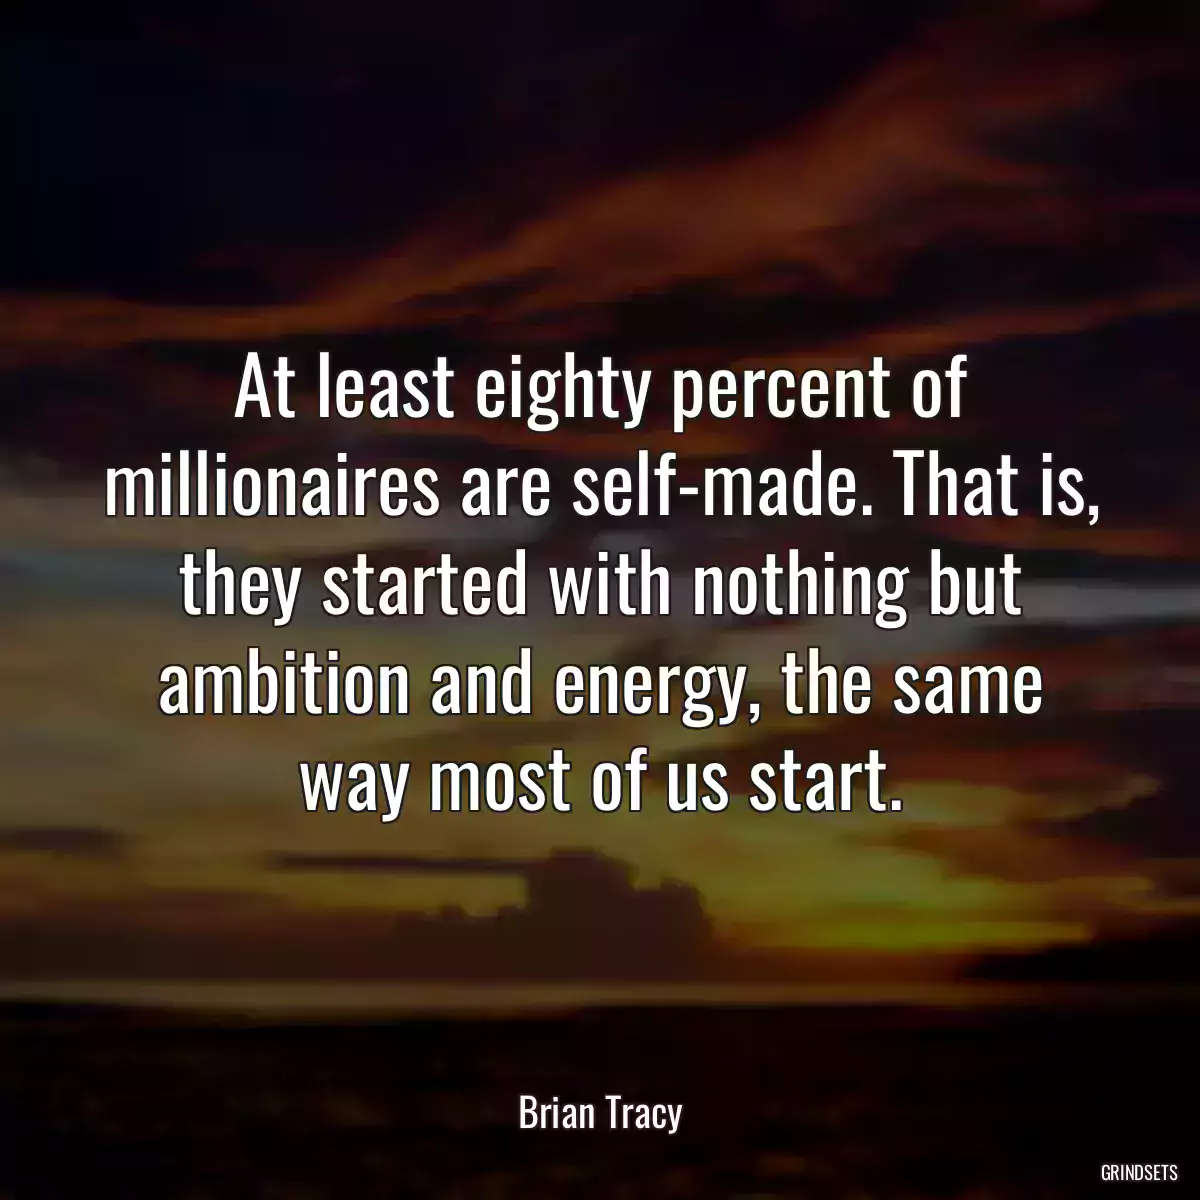 At least eighty percent of millionaires are self-made. That is, they started with nothing but ambition and energy, the same way most of us start.